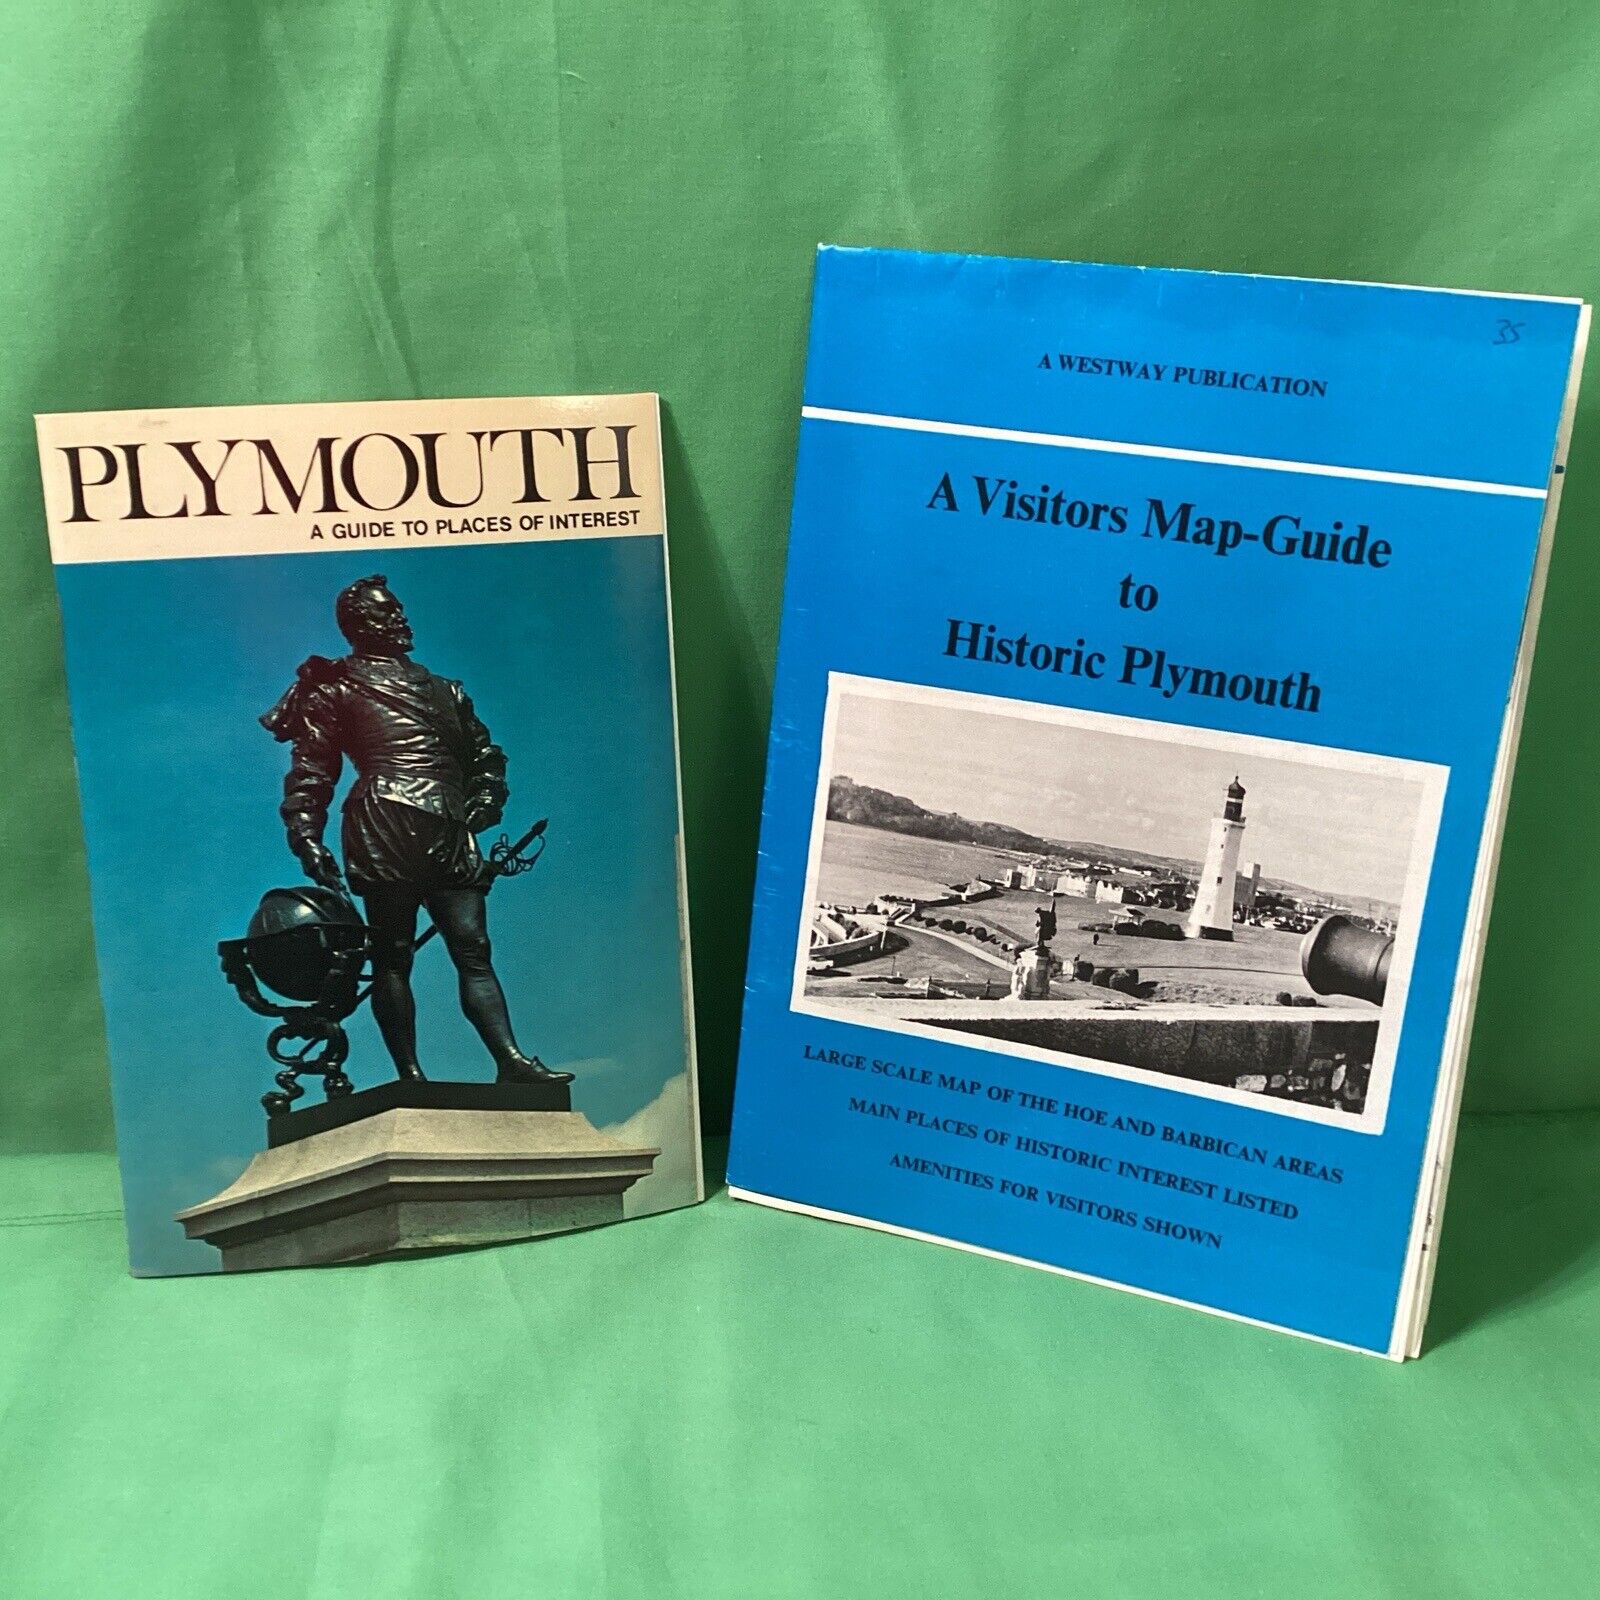 PLYMOUTH: A GUIDE TO PLACES OF INTEREST Booklet & map of Hoe & Barbican Areas